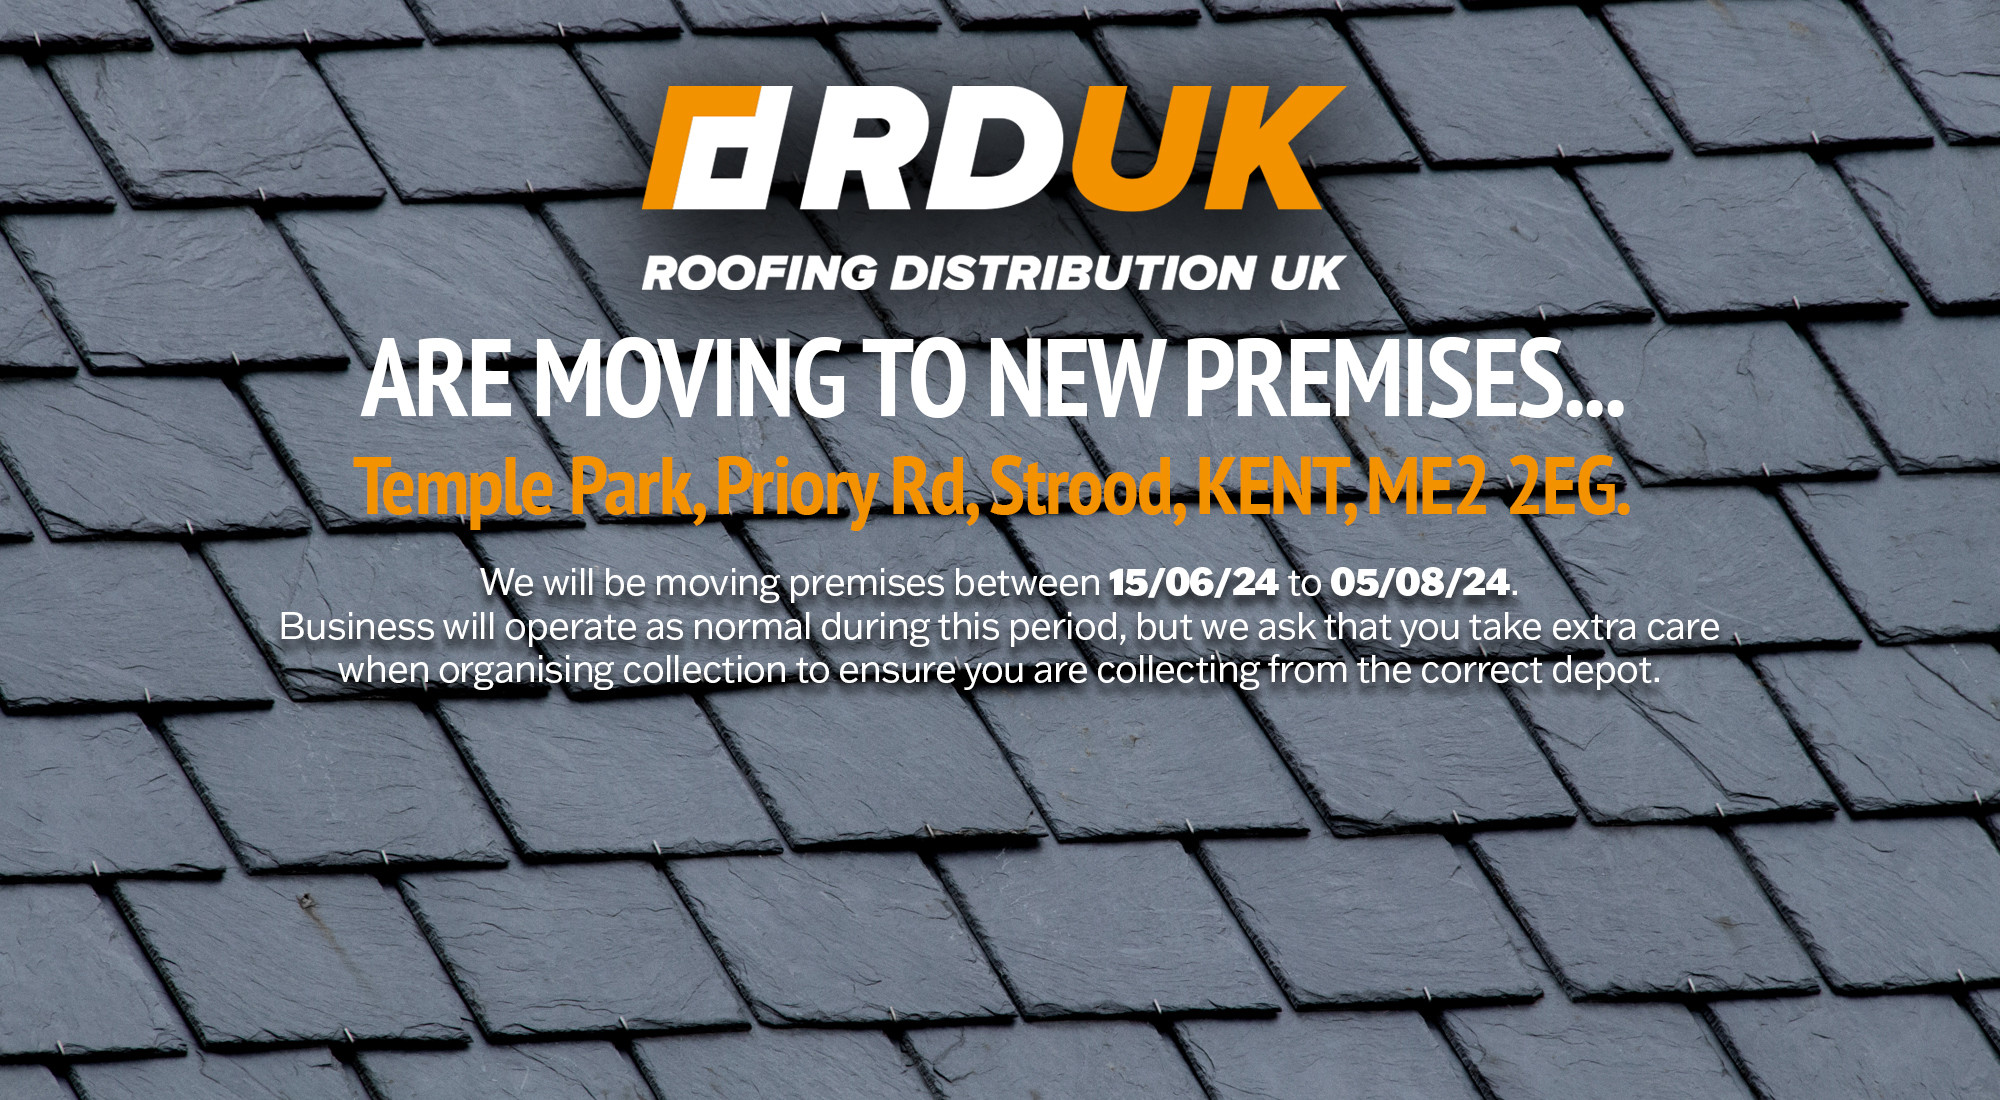 RDUK are moving to new premises - Click for details